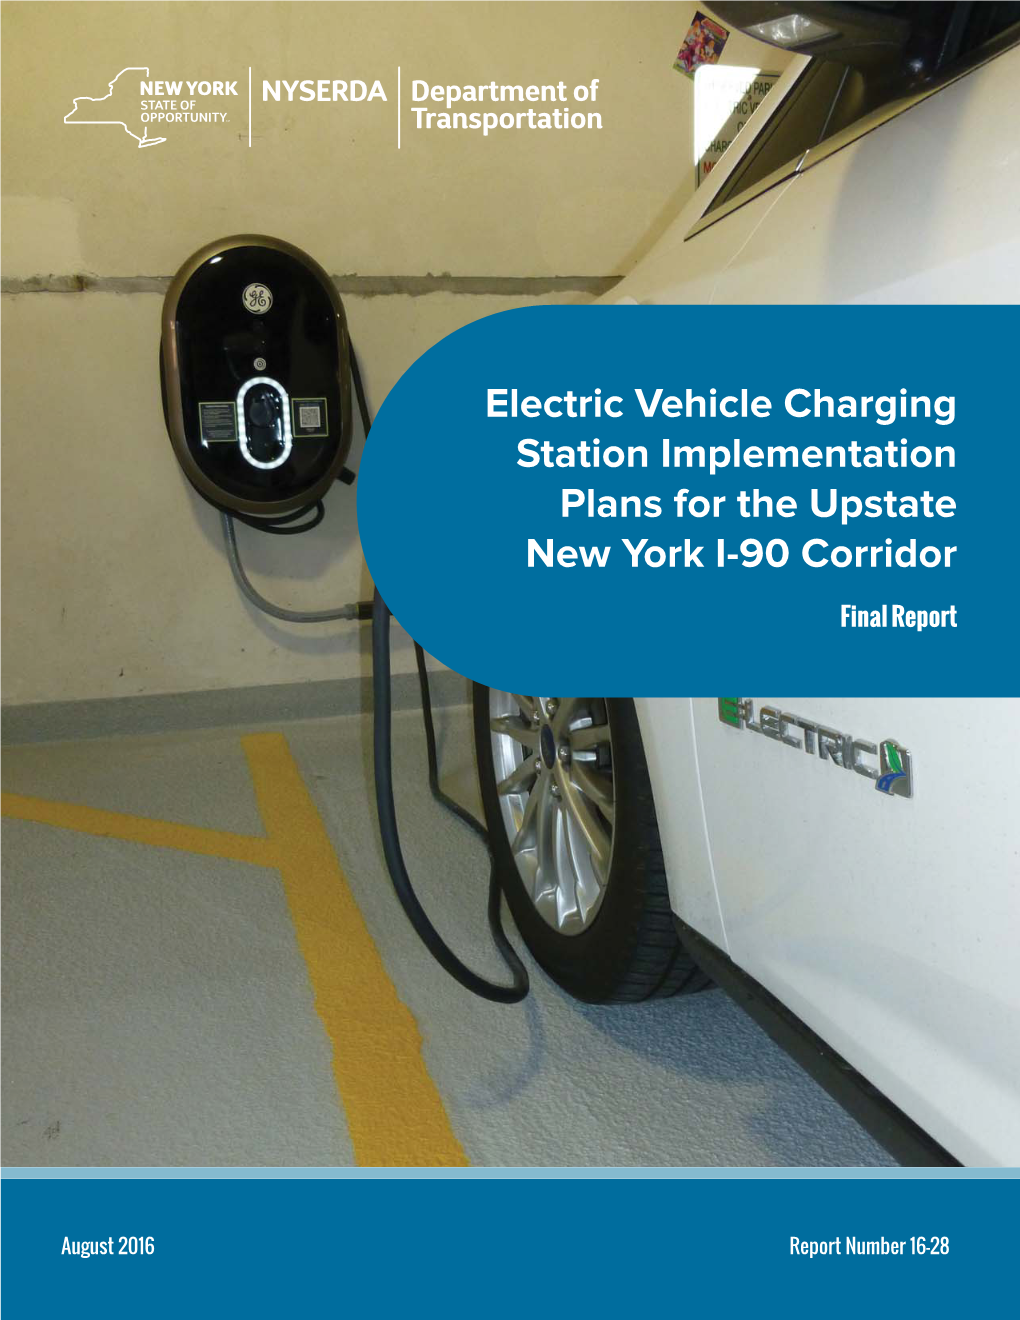 Electric Vehicle Charging Station Implementation Plans for the Upstate New York I-90 Corridor